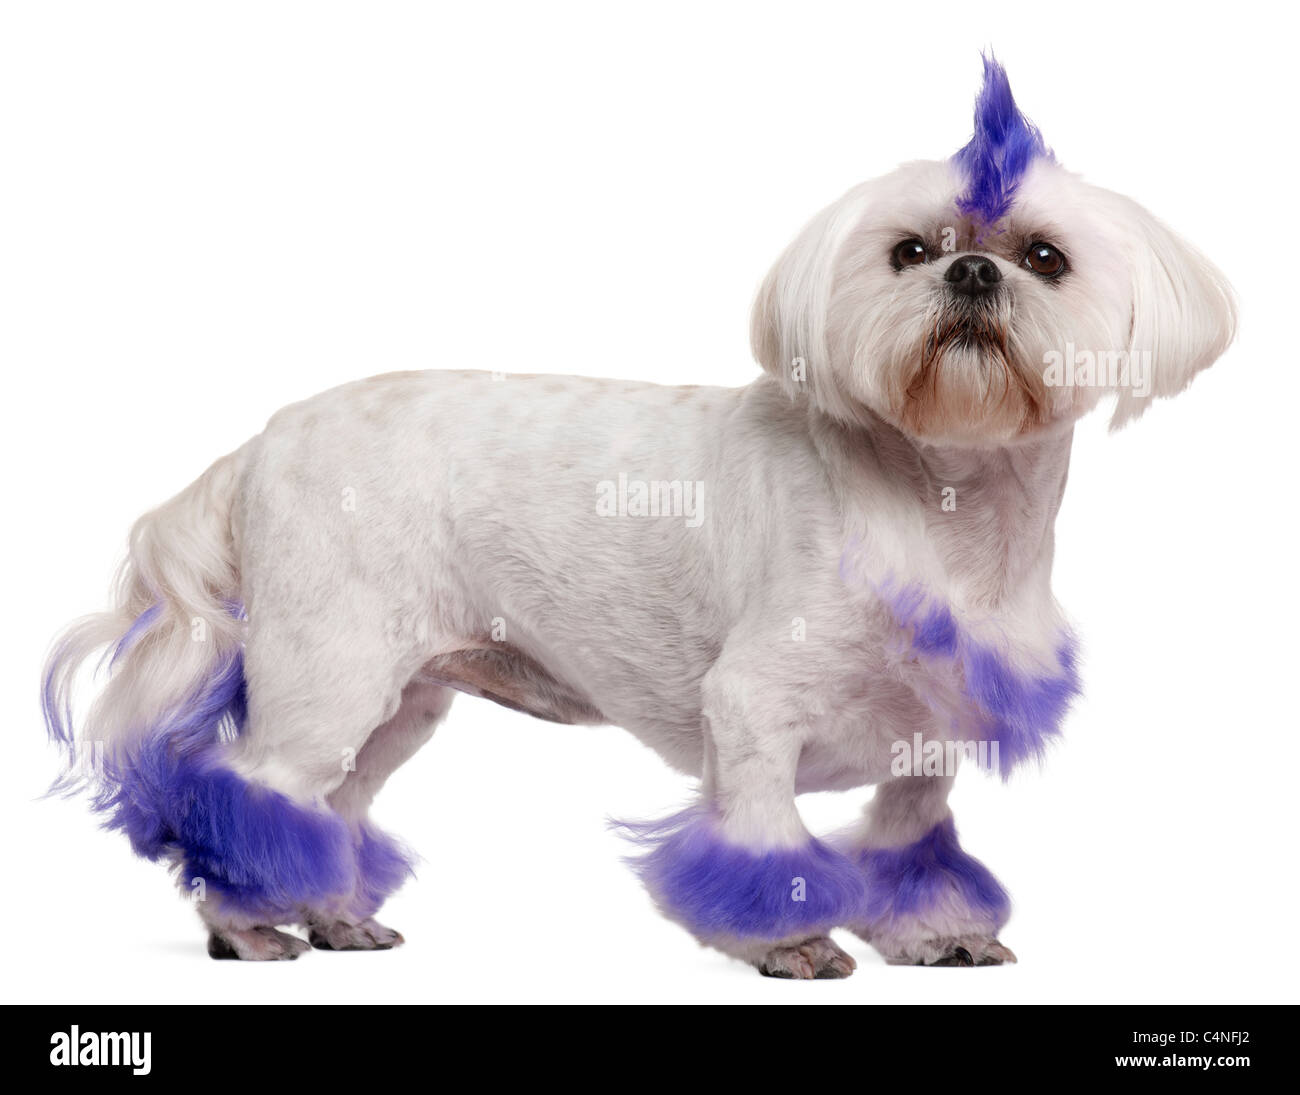 Shih Tzu with purple mohawk, 2 years old, standing in front of white background Stock Photo